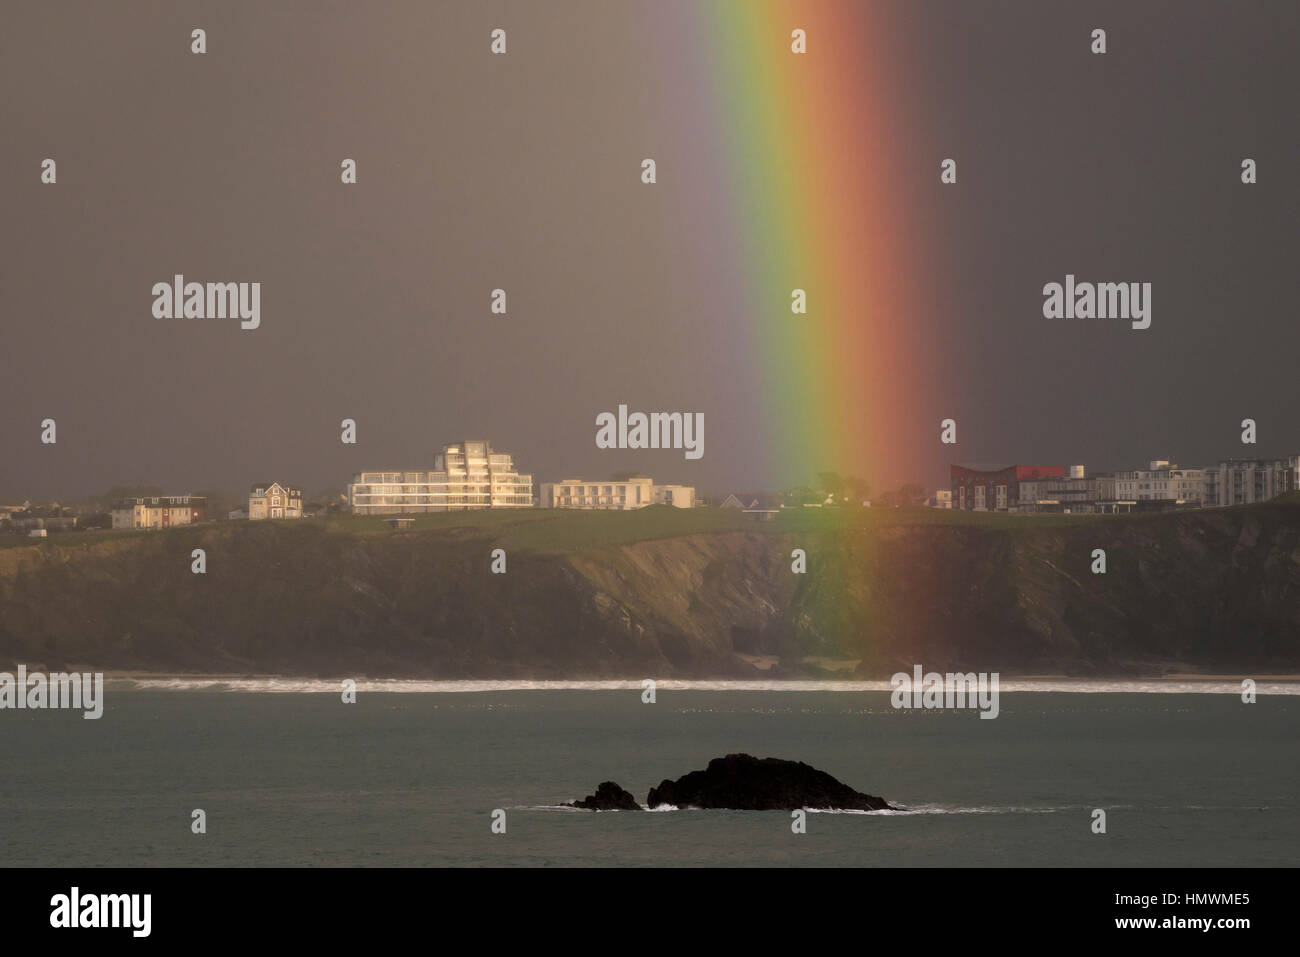 A closeup view of a rainbow over the coast of Newquay, Cornwall, England. UK weather. Stock Photo